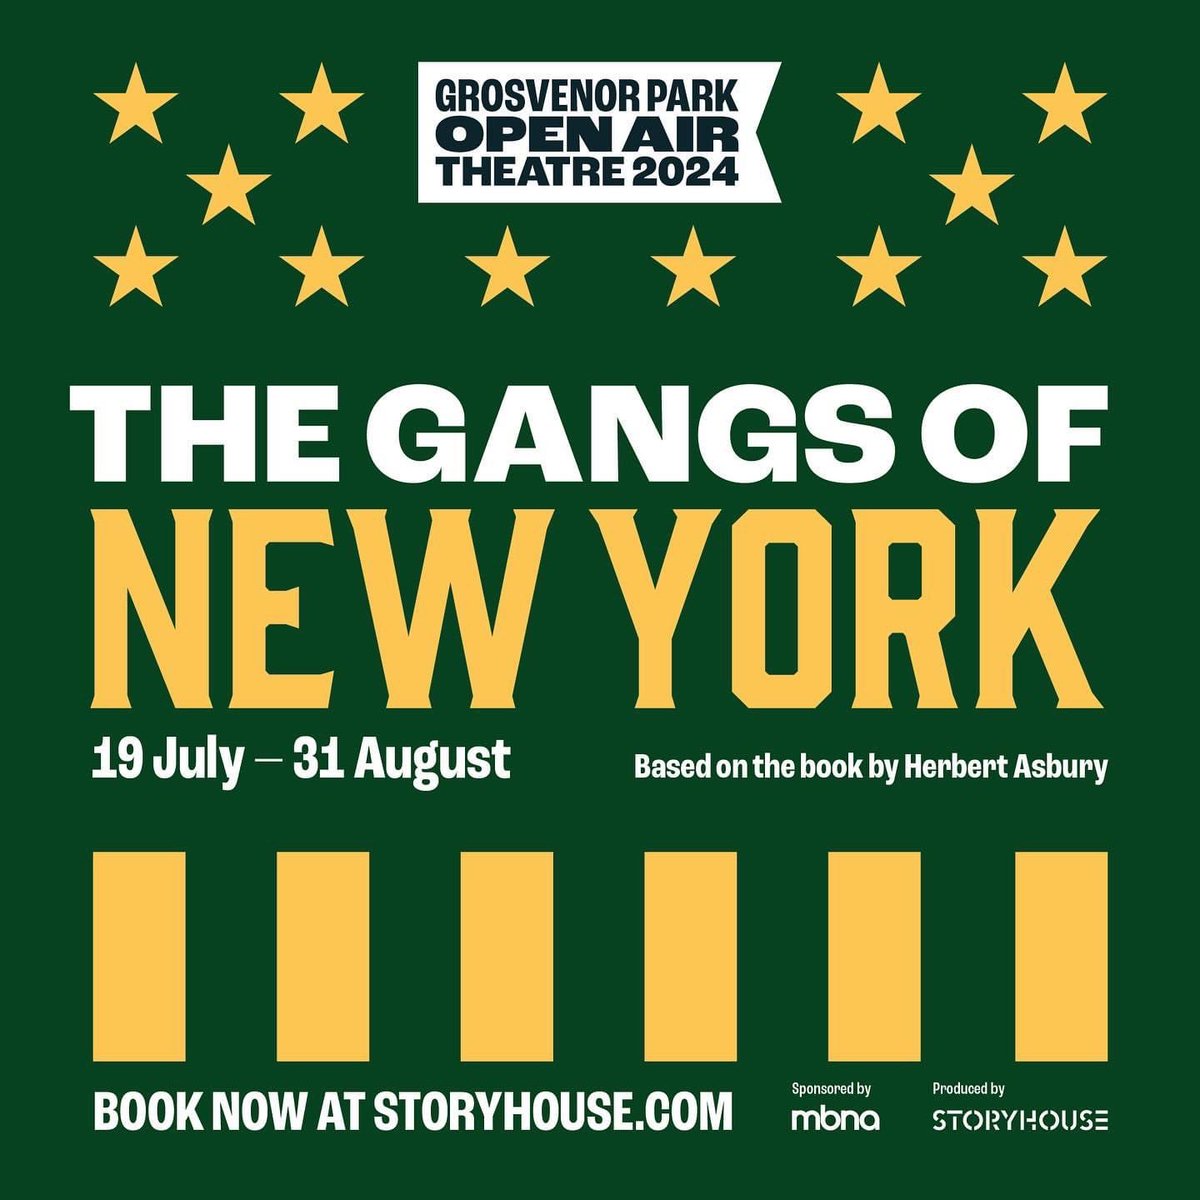 *ANNOUNCEMENT* We’re excited to share that this Summer we return to the Grosvenor Outdoor Theatre for @StoryhouseLive to Music Direct ‘Gangs Of New York’ 🇺🇸 19 July - 31 August Book now 📸 @ccamacasuu